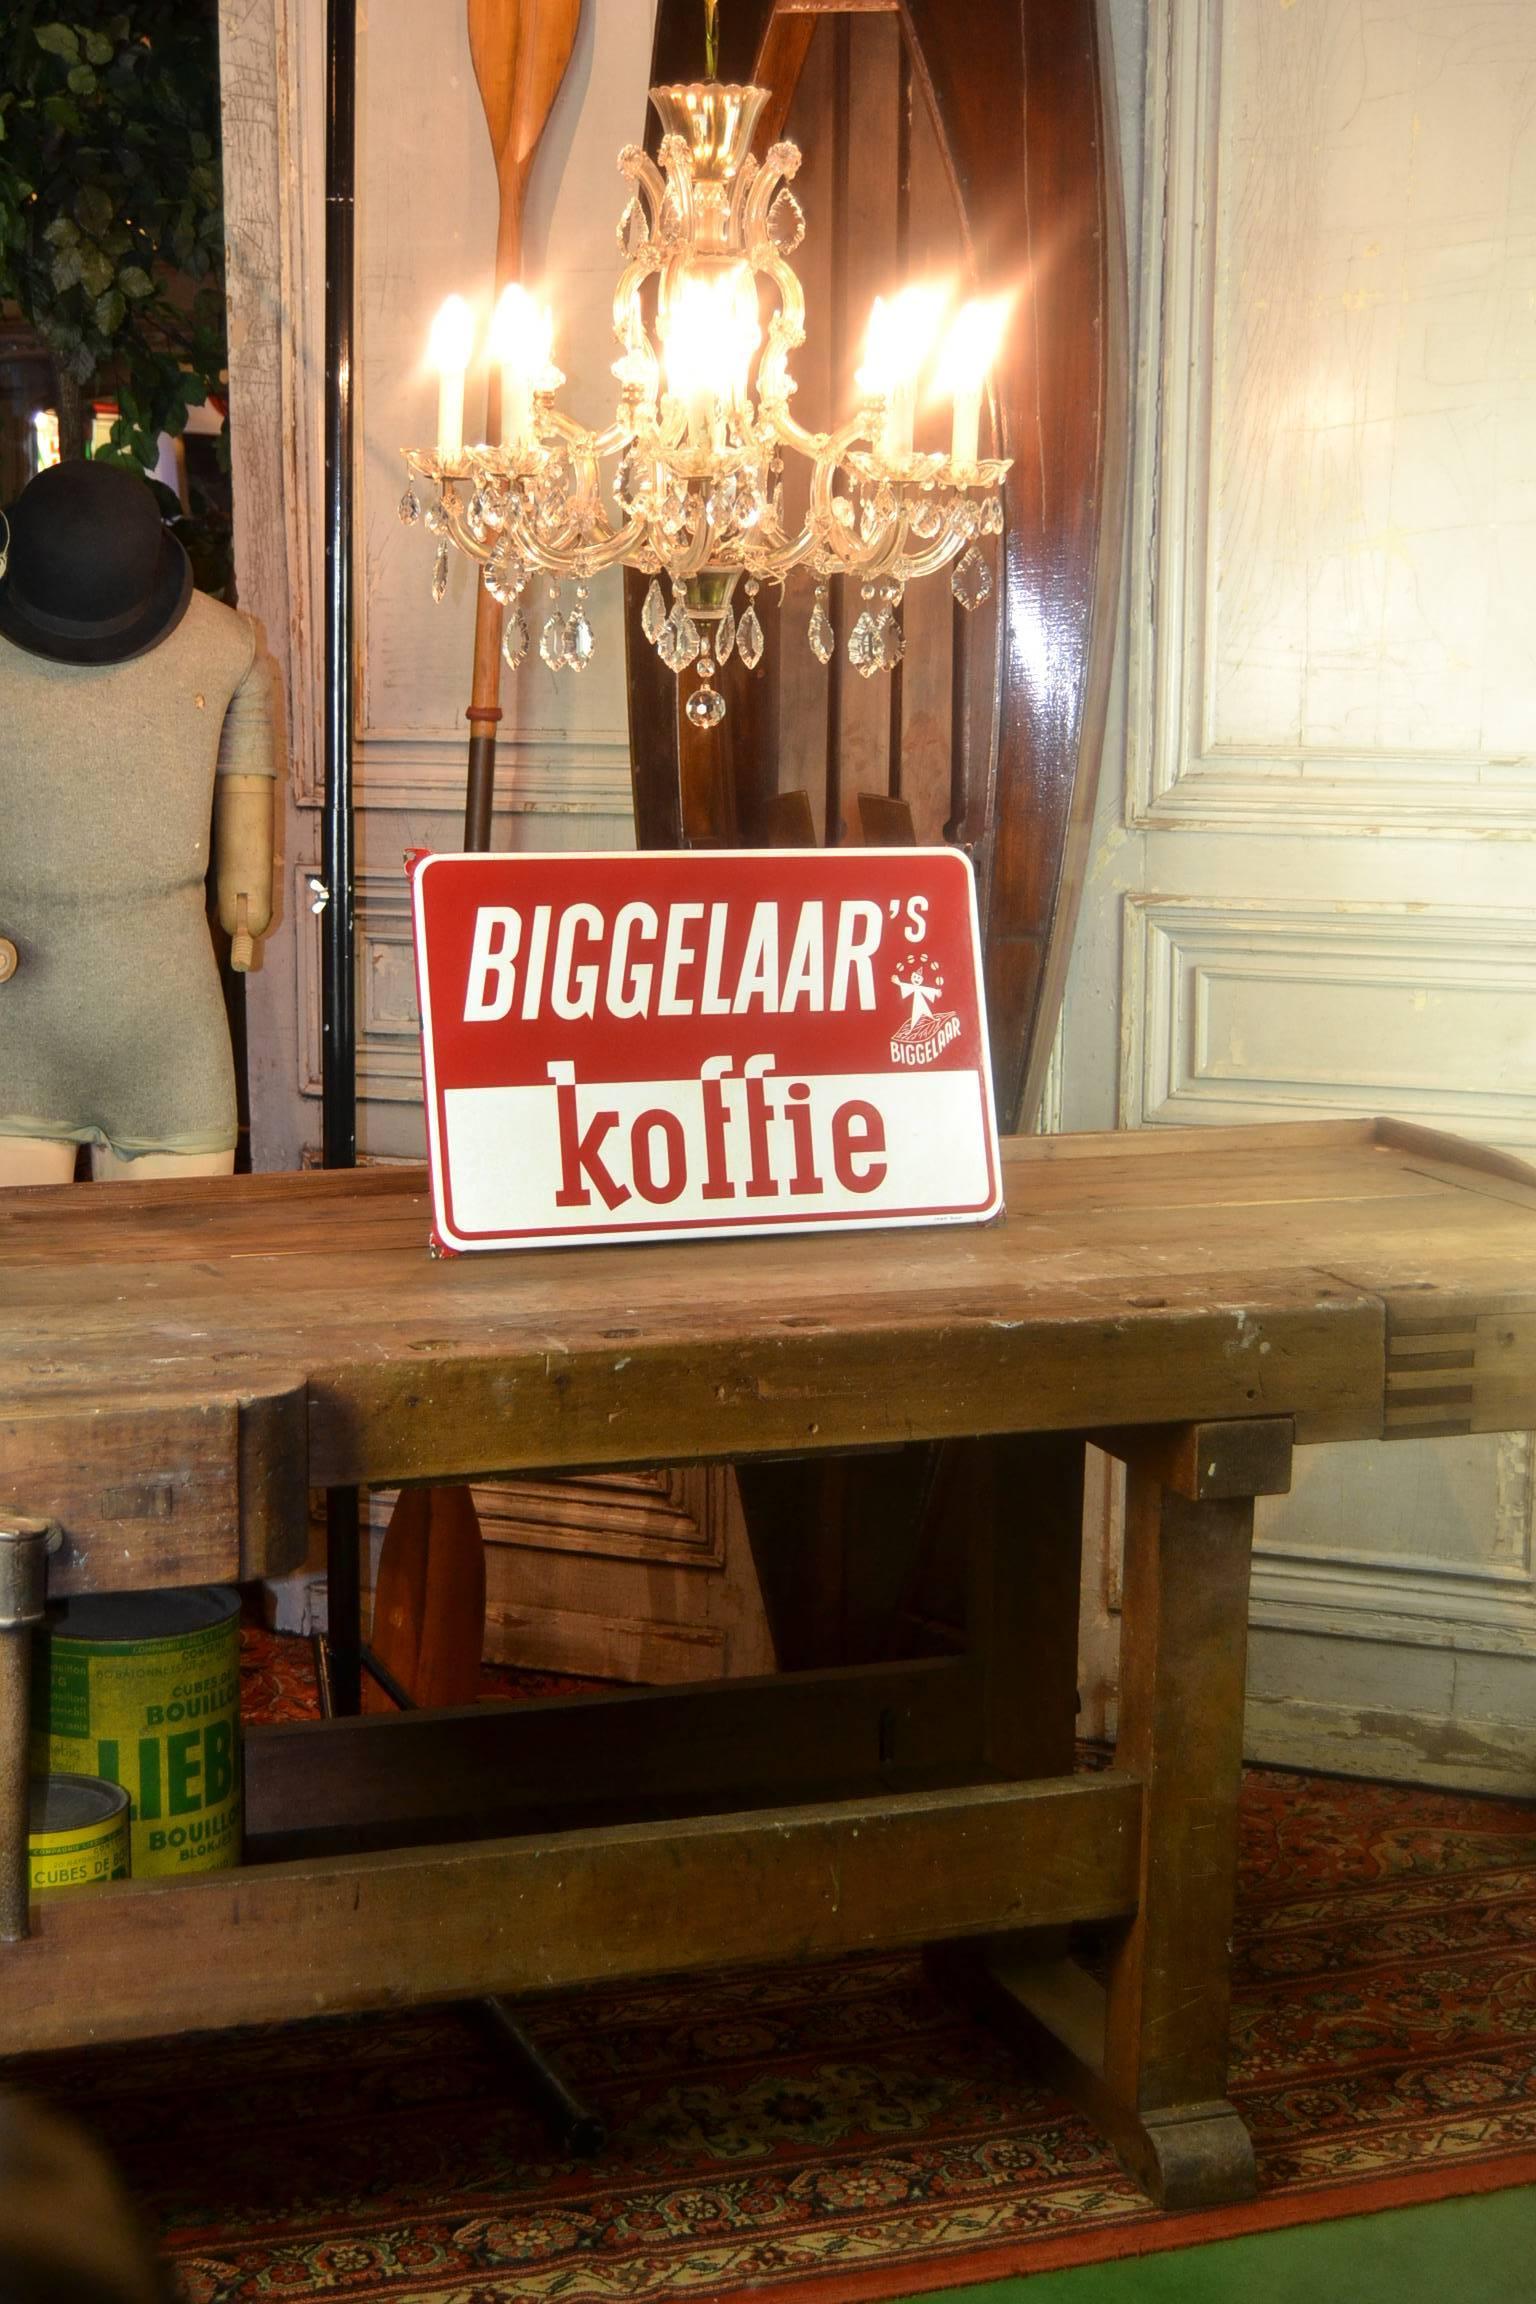 Mid-Century enamel sign - porcelain sign - advertising sign 
for Biggelaar's koffie - Coffee Netherlands.
Coffee roaster company (1884-1983)

This red en white square advertising sign was made in the 1950s 
by Langcat Bussum, Holland.
It has